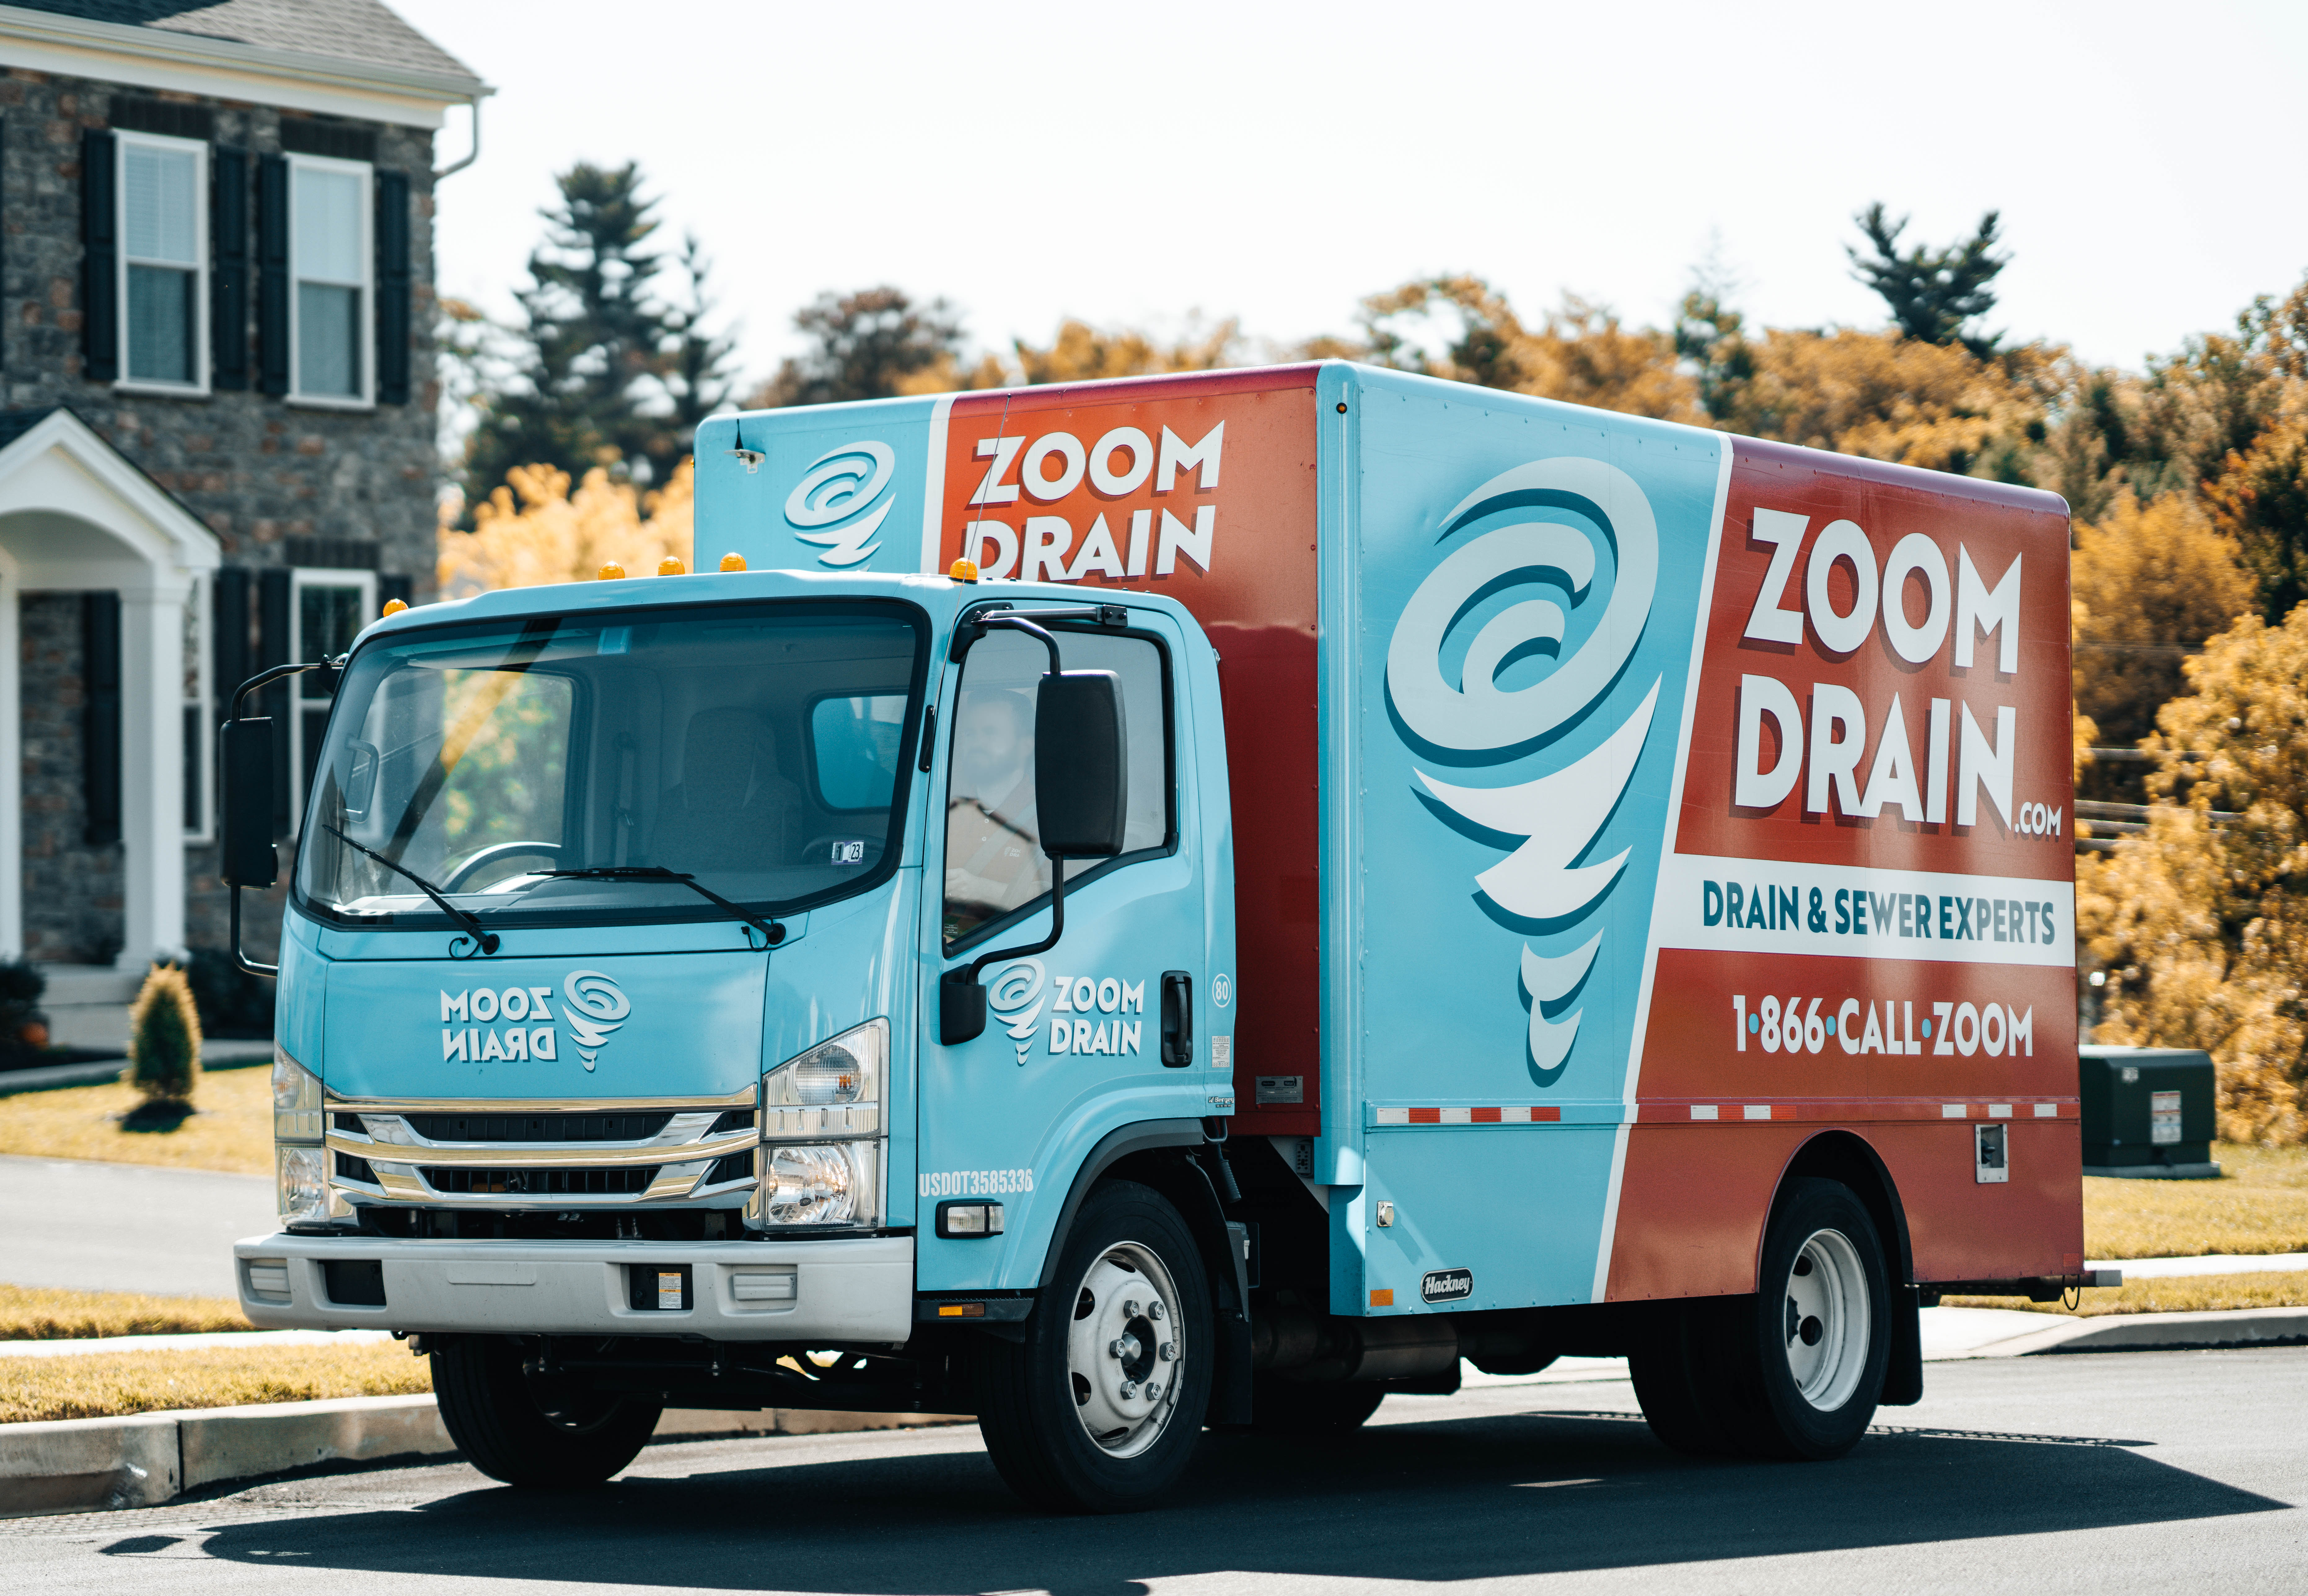 Now Open: Get To Know The Owners Of Zoom Drain Rhode Island!